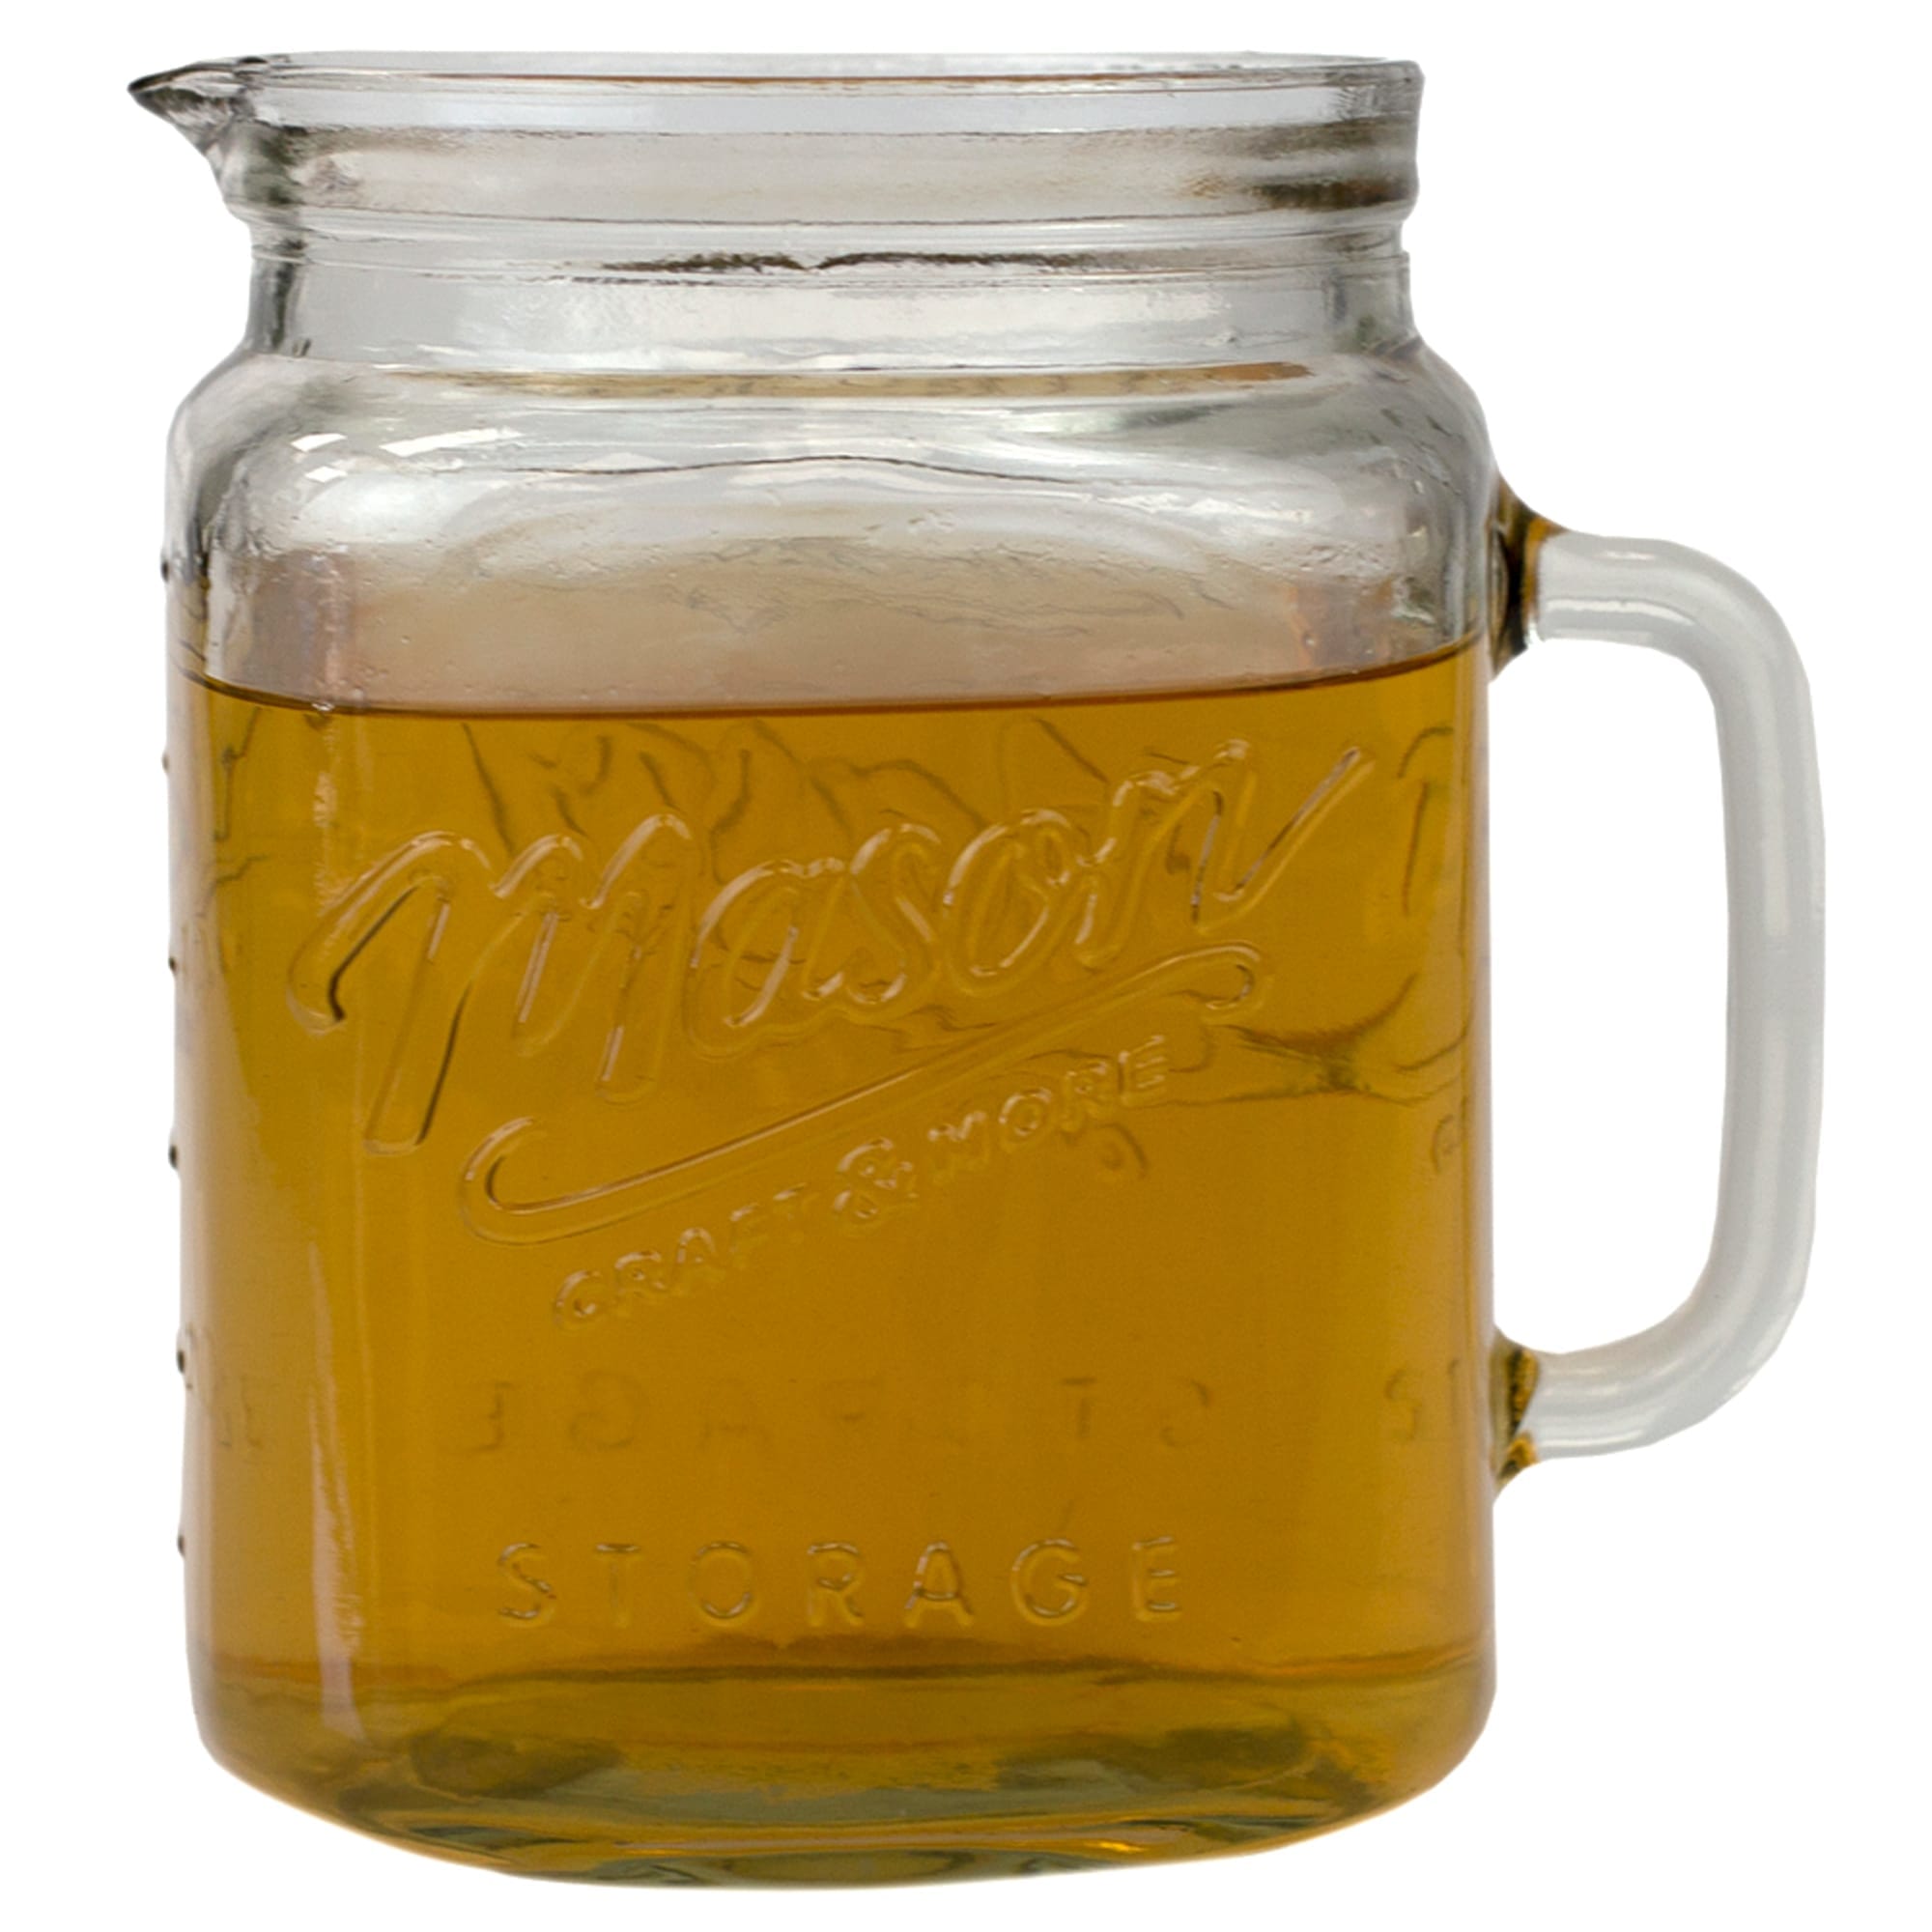 Home Basics 67.7 oz Glass Mason Jar Pitcher with Measurement Markings and Easy Grip Handle, Clear $3.00 EACH, CASE PACK OF 6